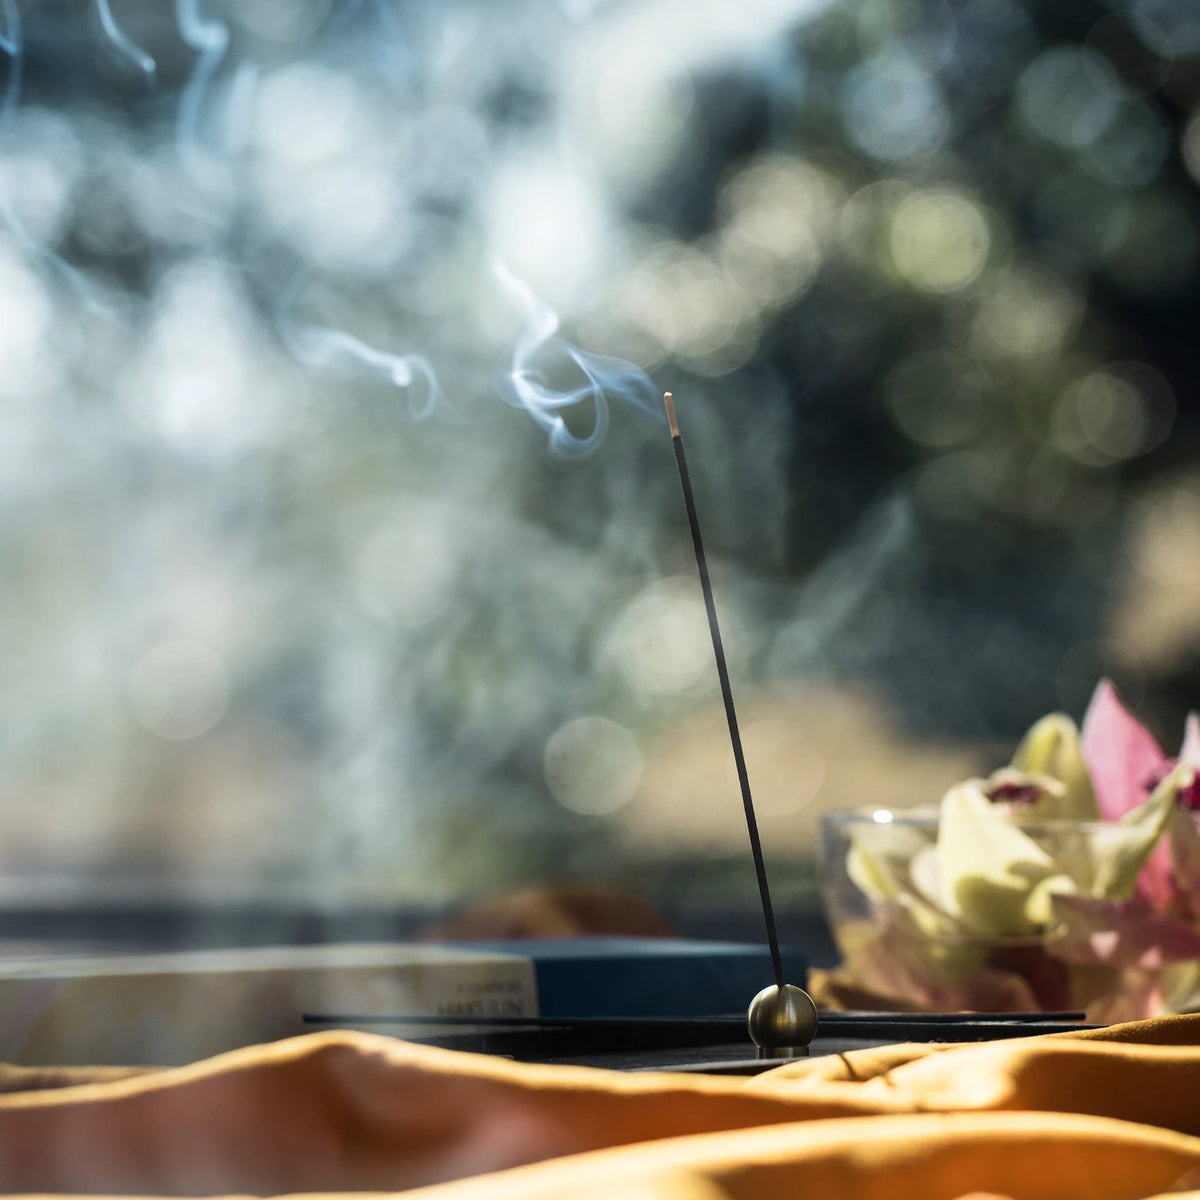 A Senko Brass Ball Incense Holder on a table with flowers.